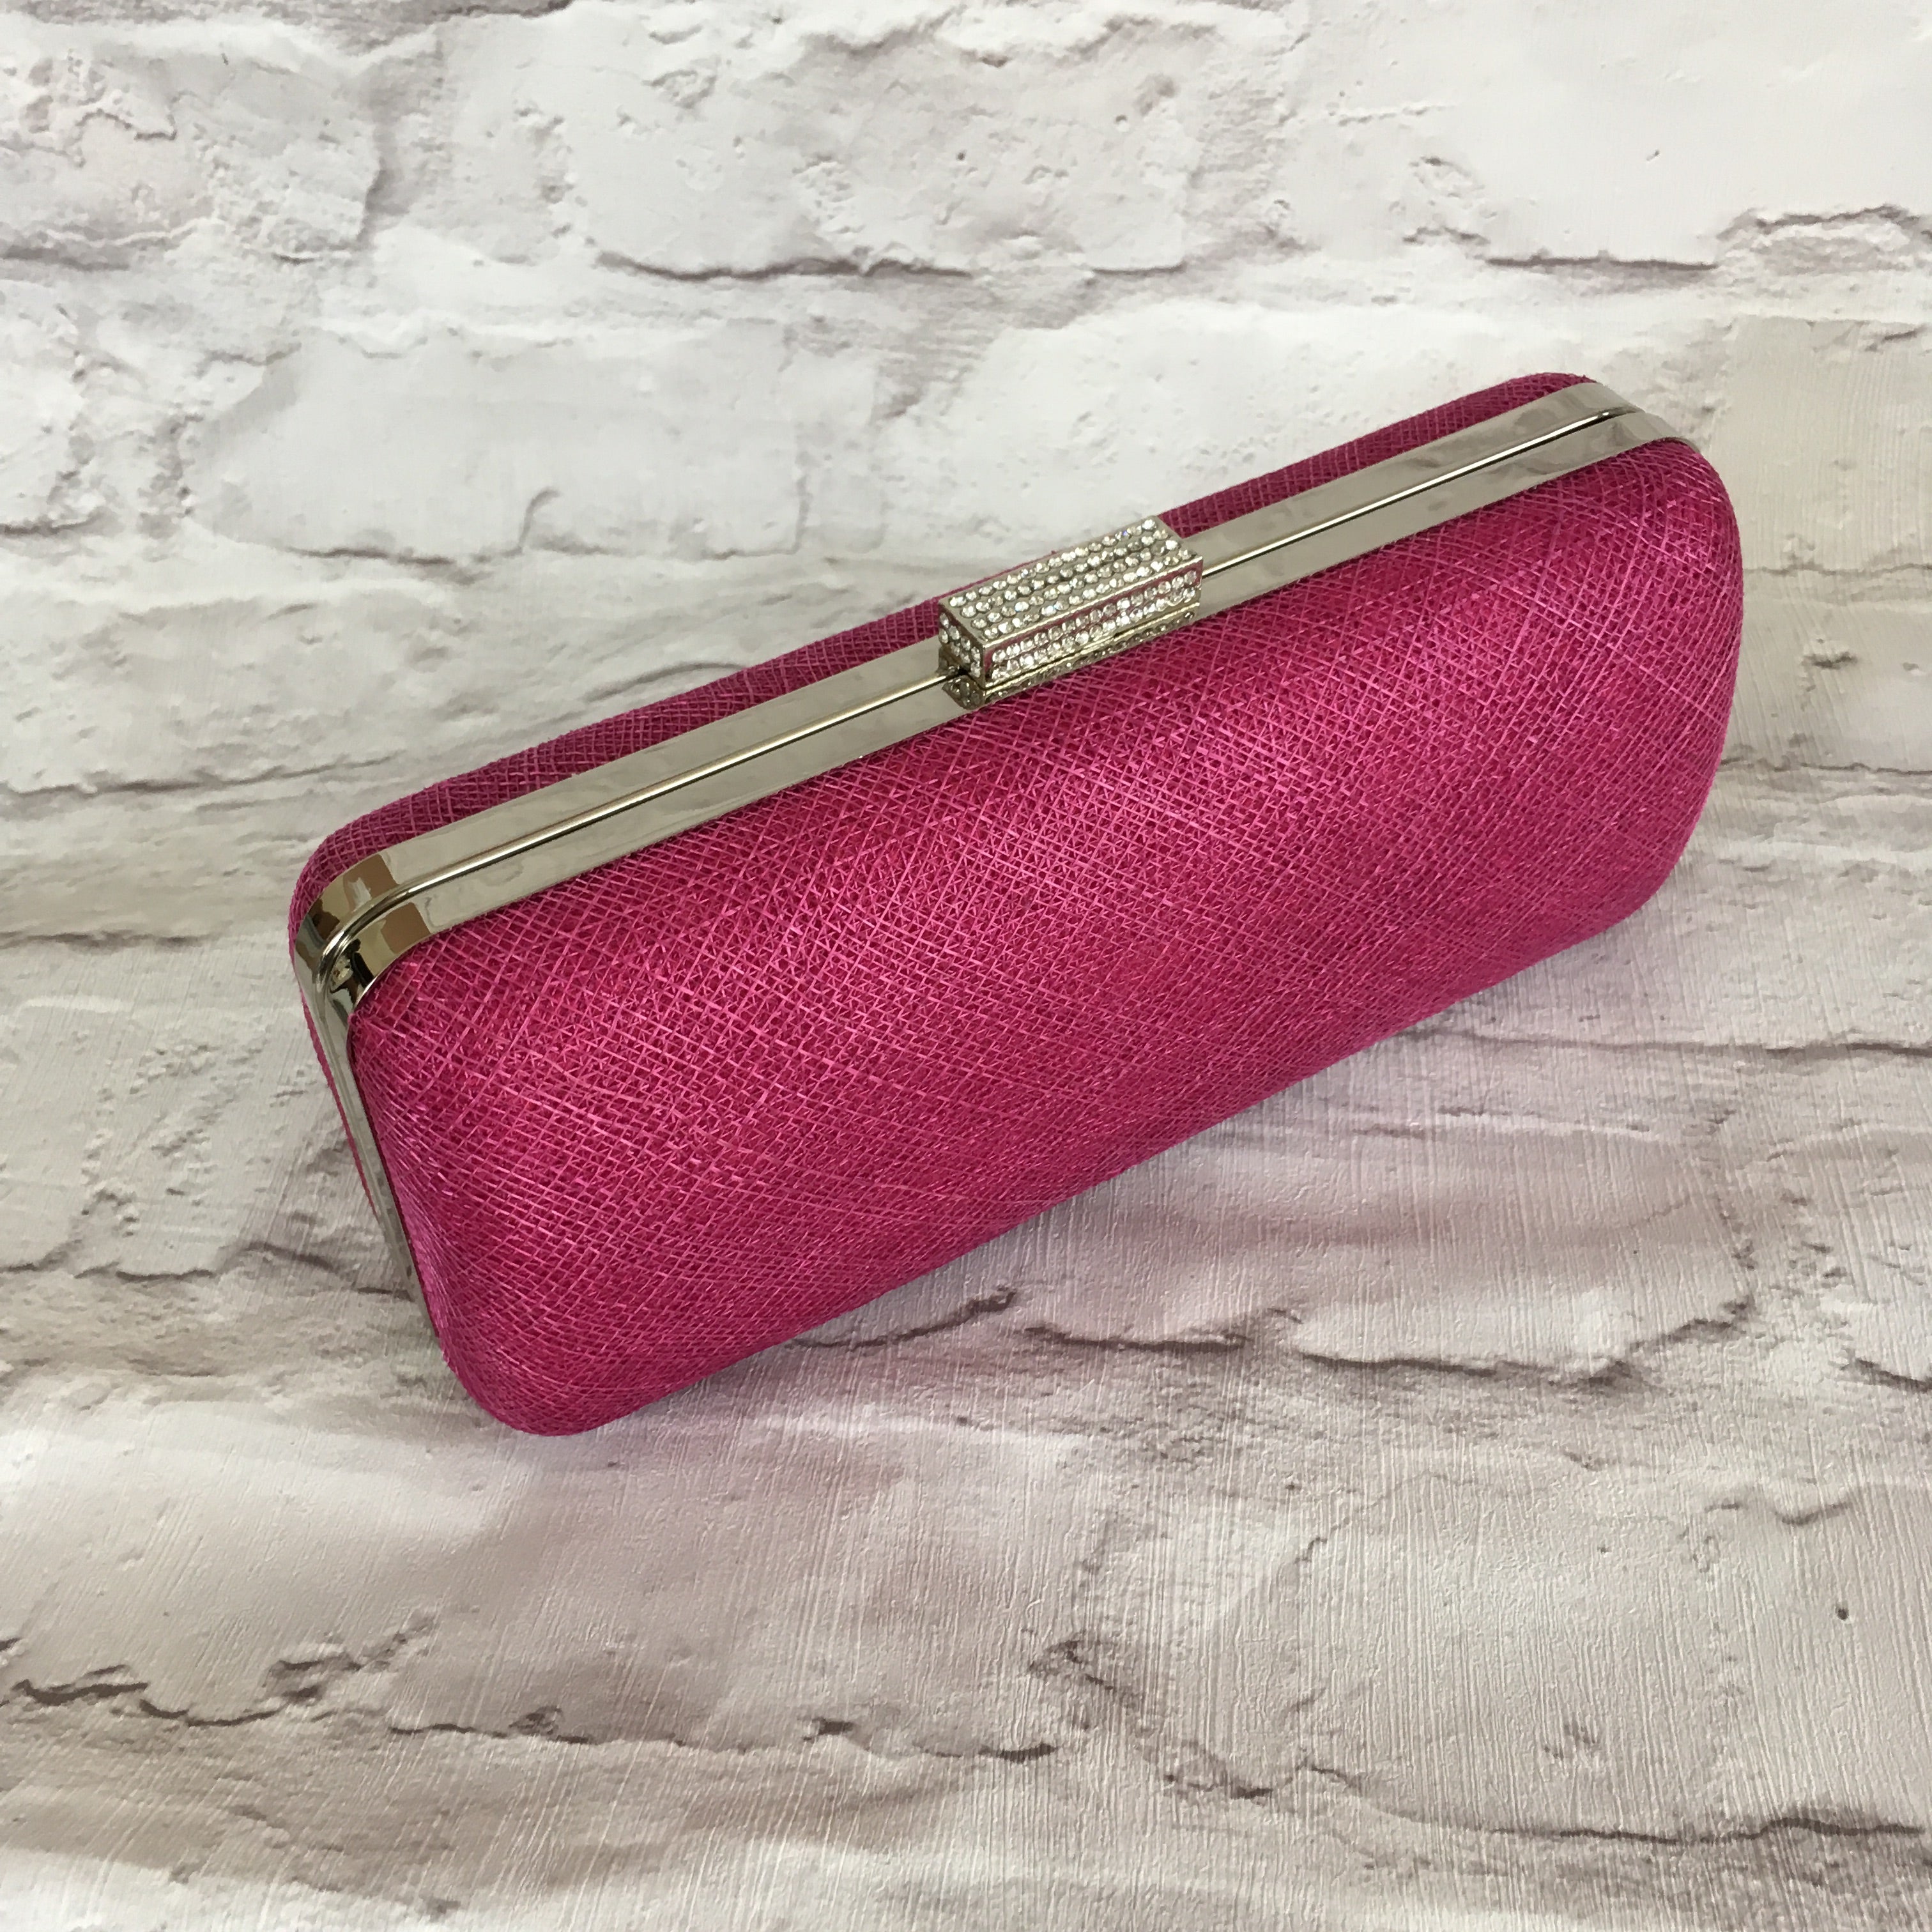 Hard Case Clutch Bag - All Colours Available